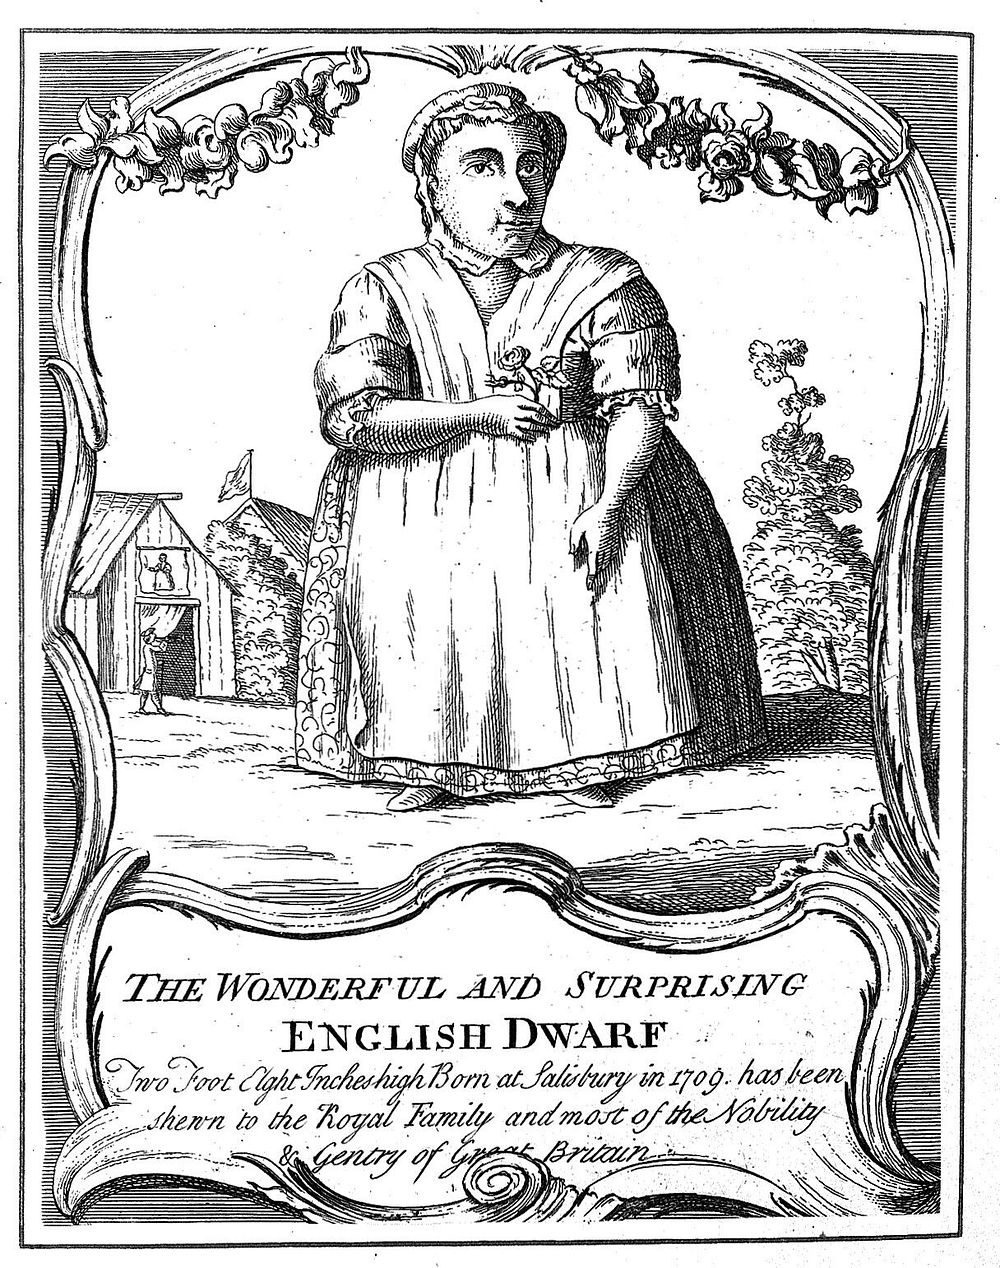 A female dwarf, holding a flower, in a country setting. Etching.